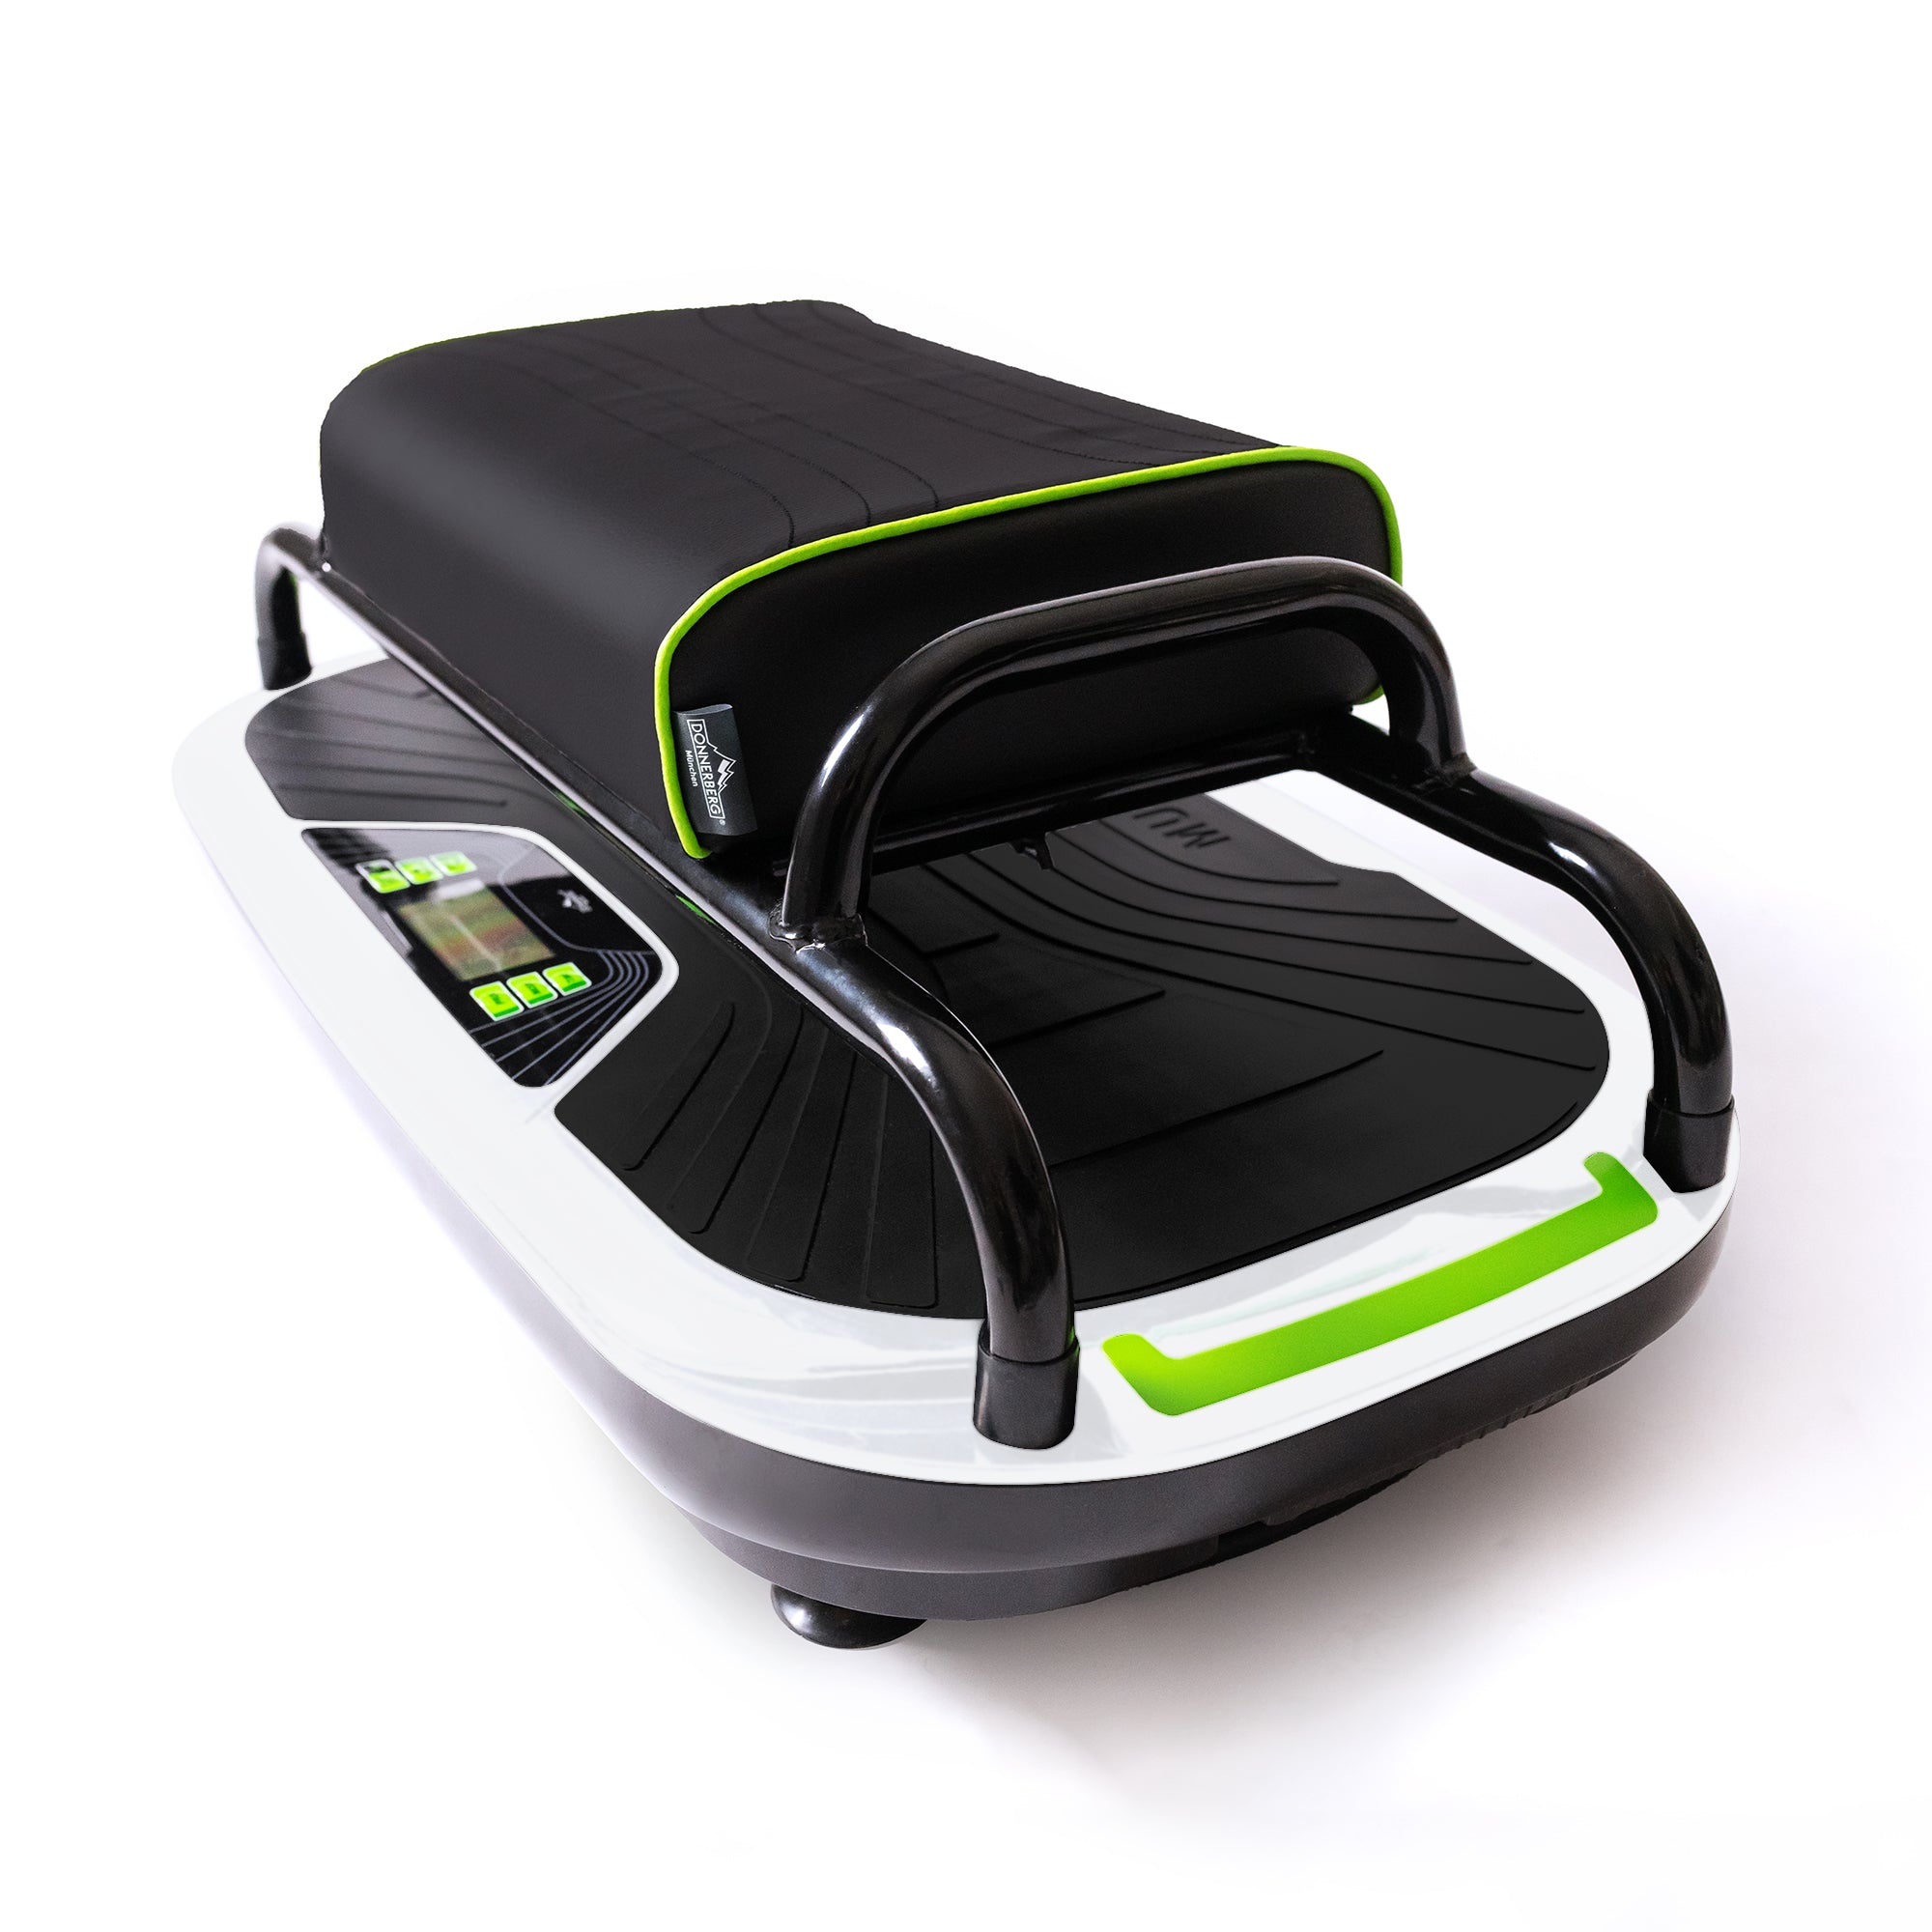 Vibration plate with seat in black color